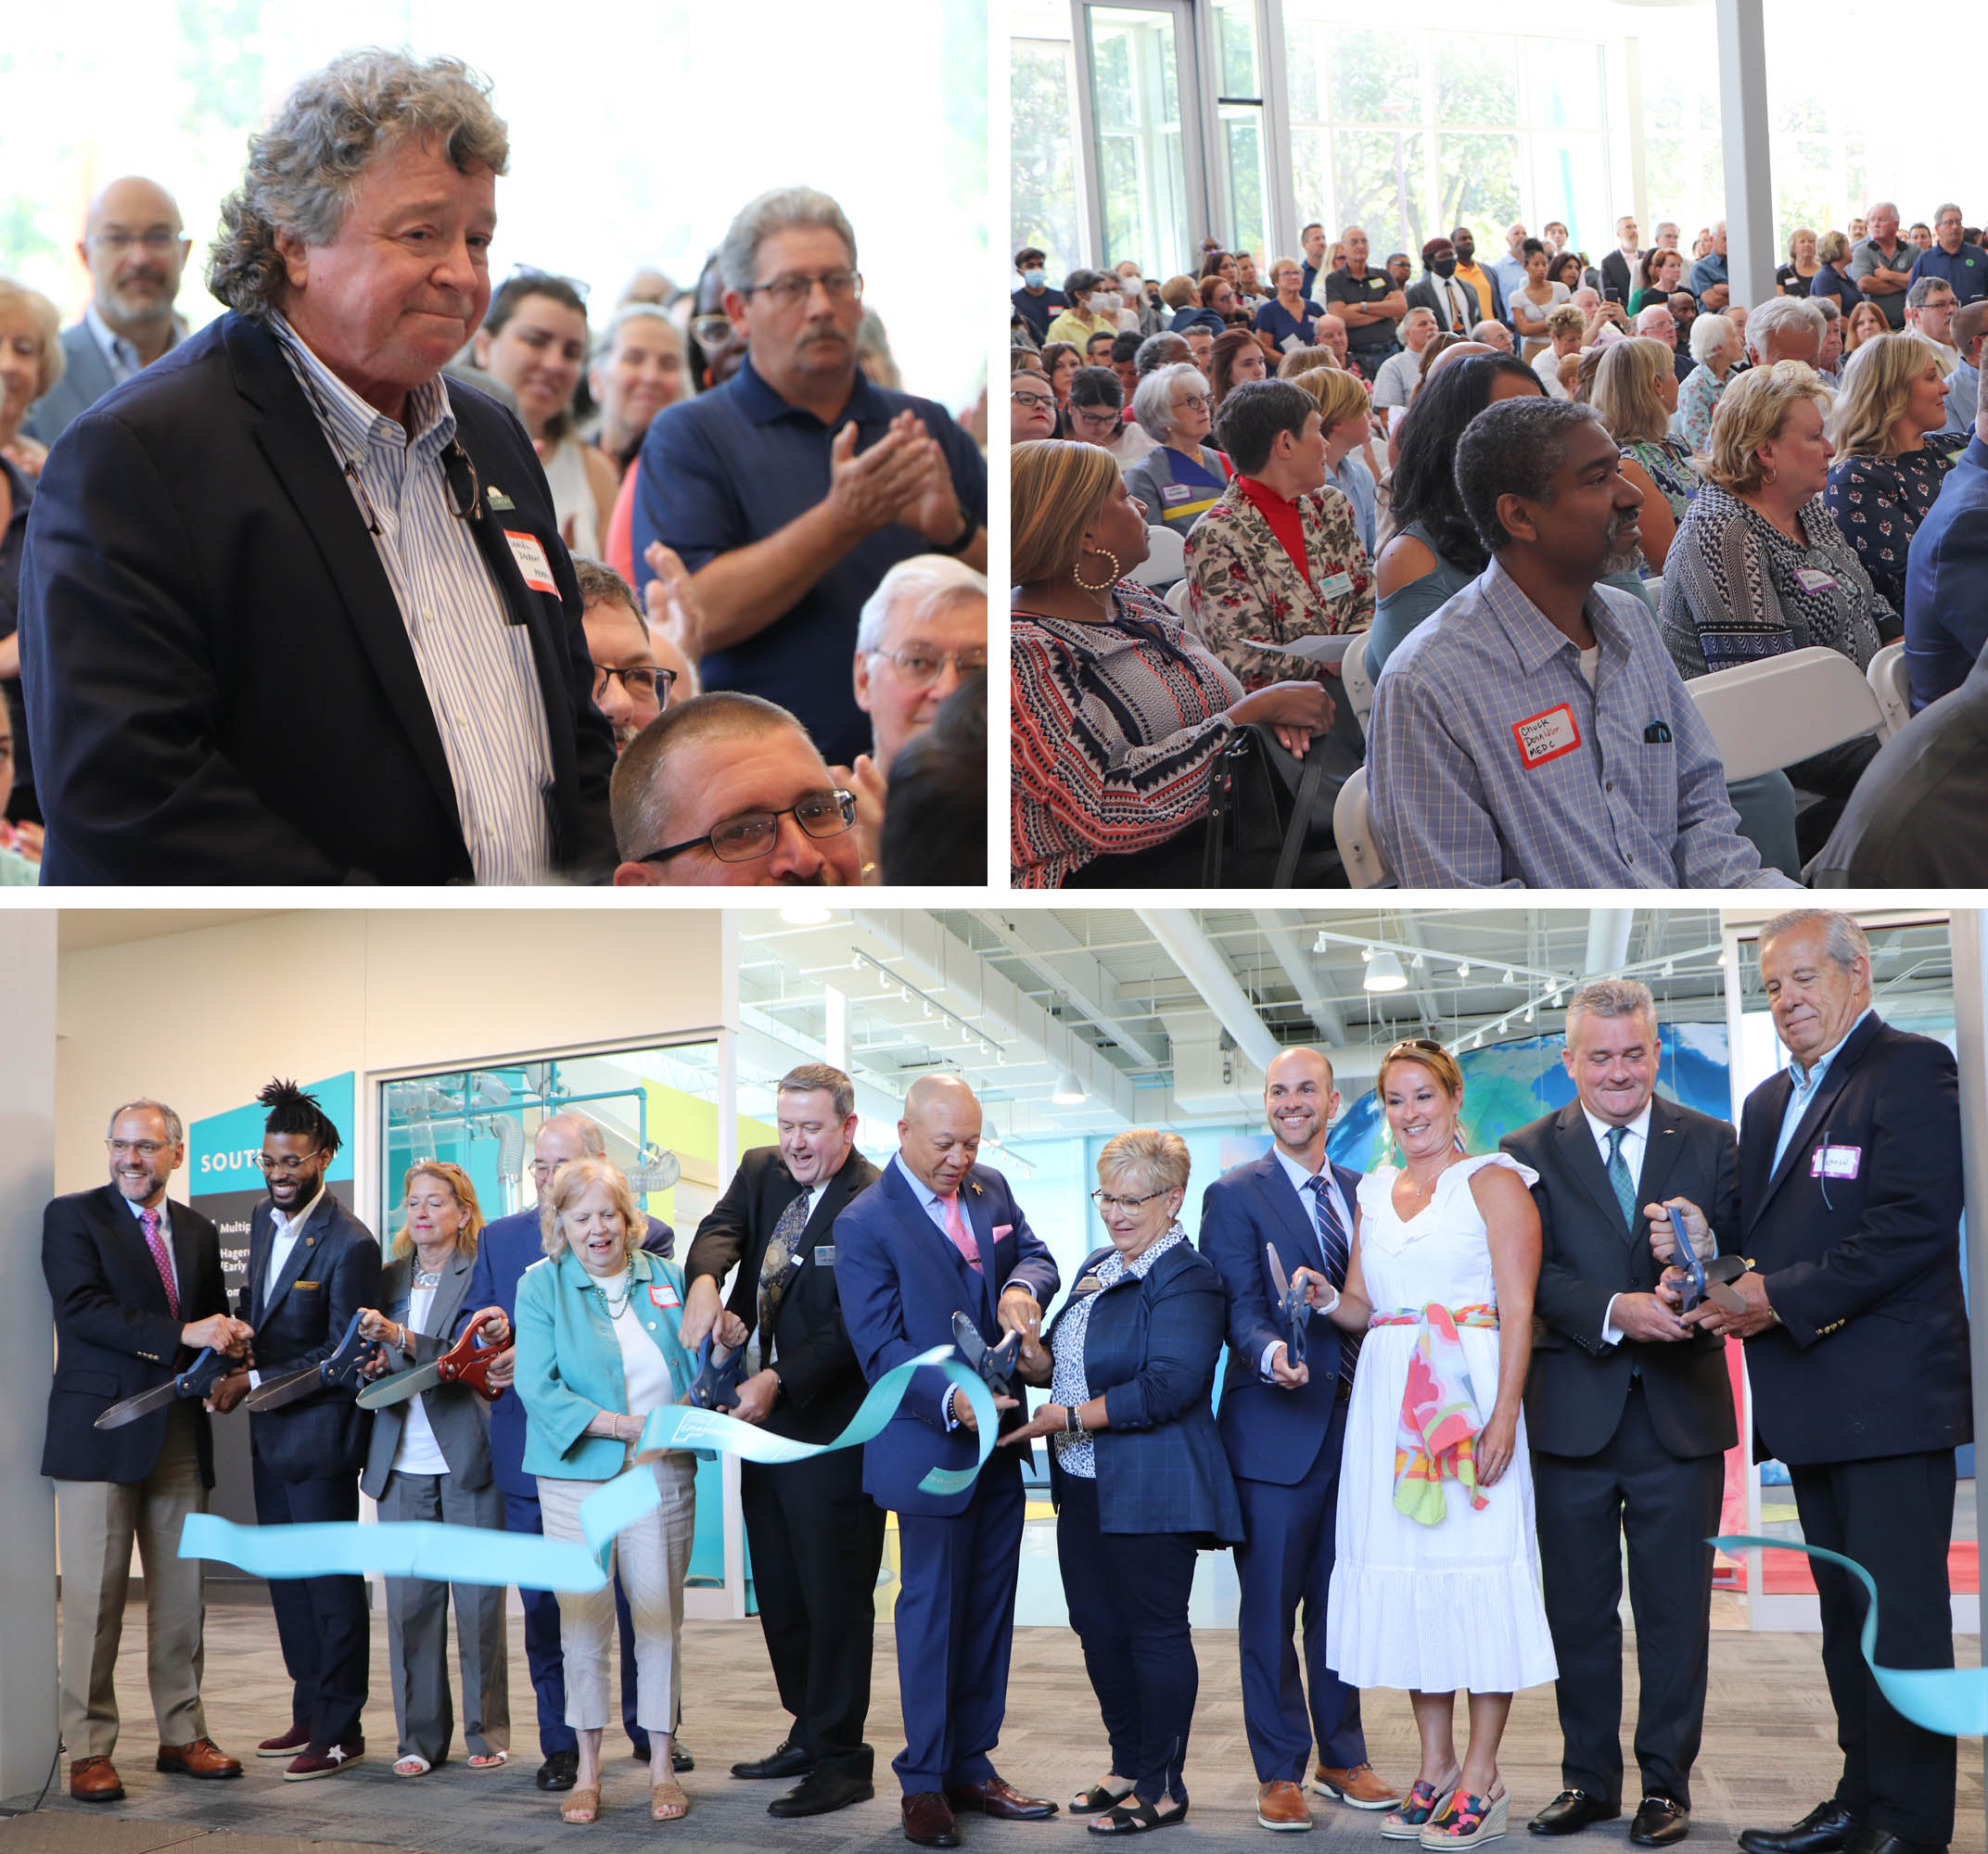 Scenes from the Sloan Museum of Discovery ribbon cutting